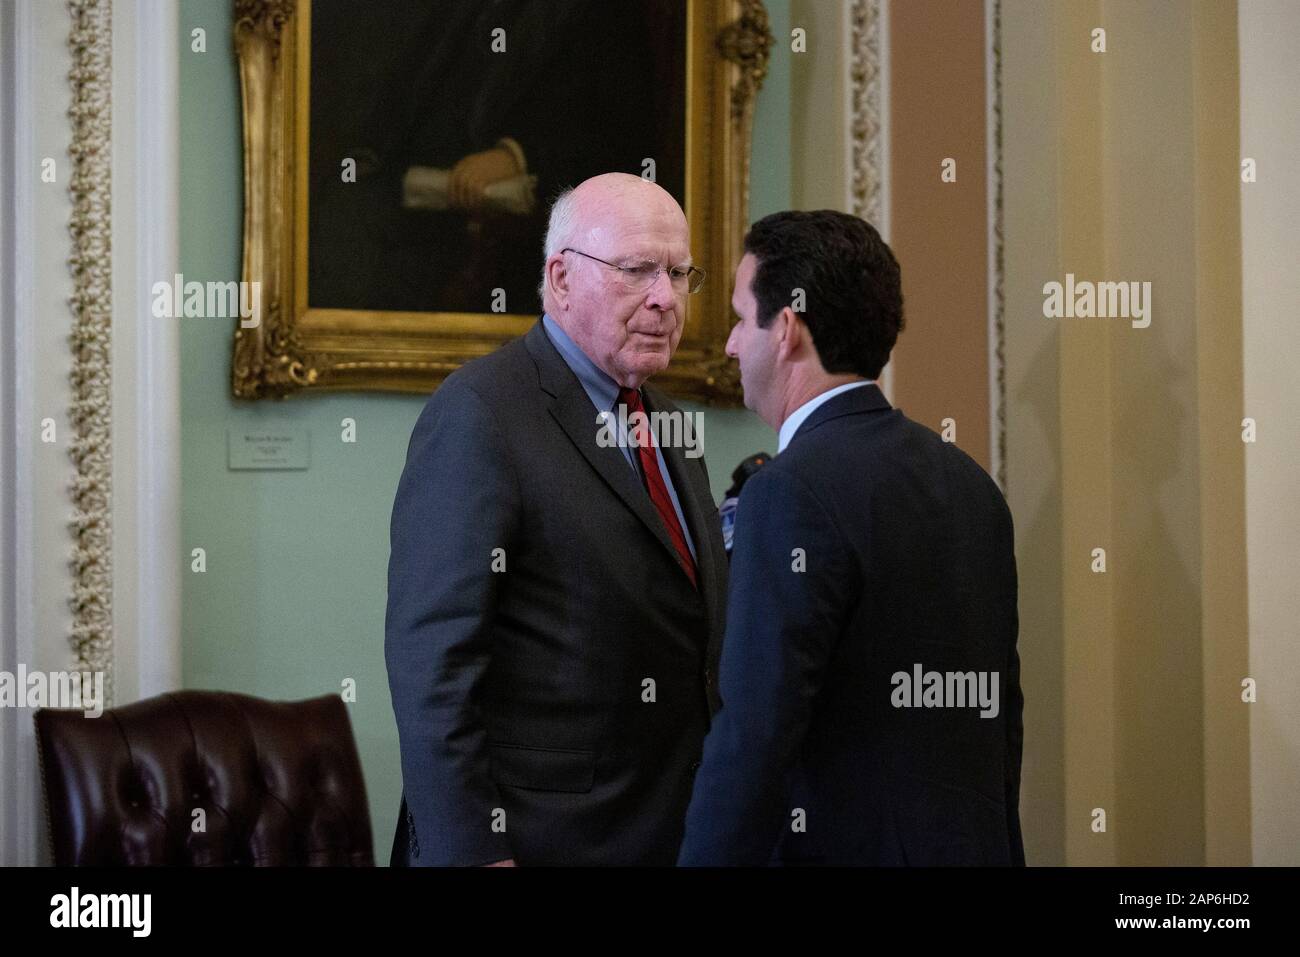 United States Senator Patrick Leahy (Democrat of Vermont) speaks to United States Senator Brian Schatz (Democrat of Hawaii) as they make their way to the Senate Floor at the United States Capitol in Washington, DC, U.S., on Tuesday, January 21, 2020, as the United States Senate formally starts the impeachment trial against United States President Donald J. Trump. Credit: Stefani Reynolds/CNP /MediaPunch Stock Photo